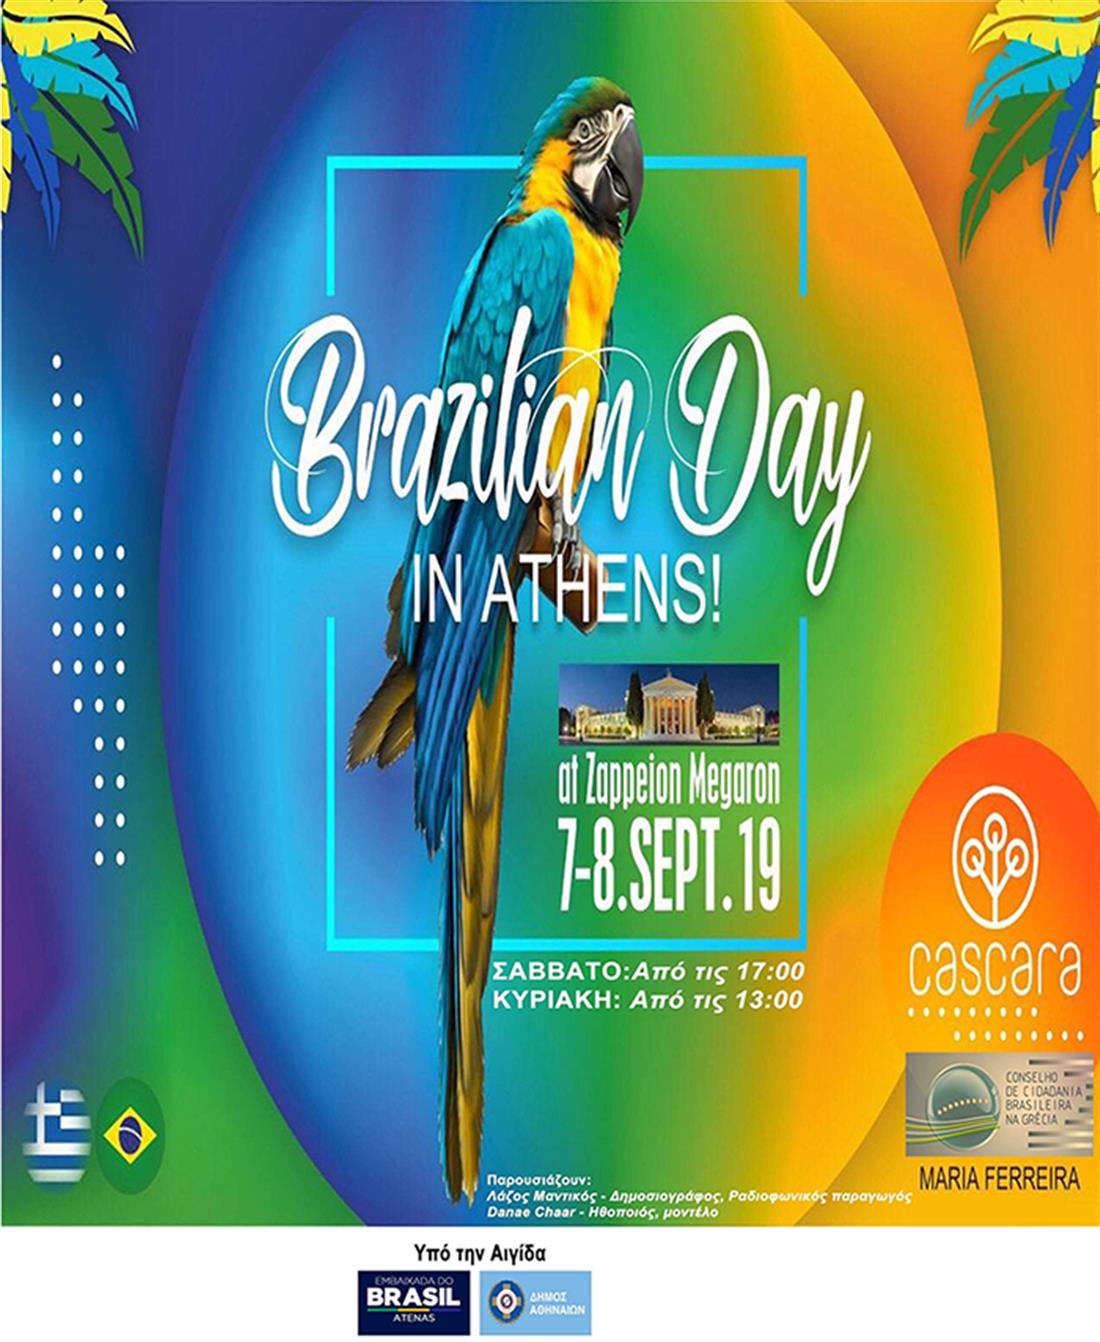 Brazilian Day in Athens 2019